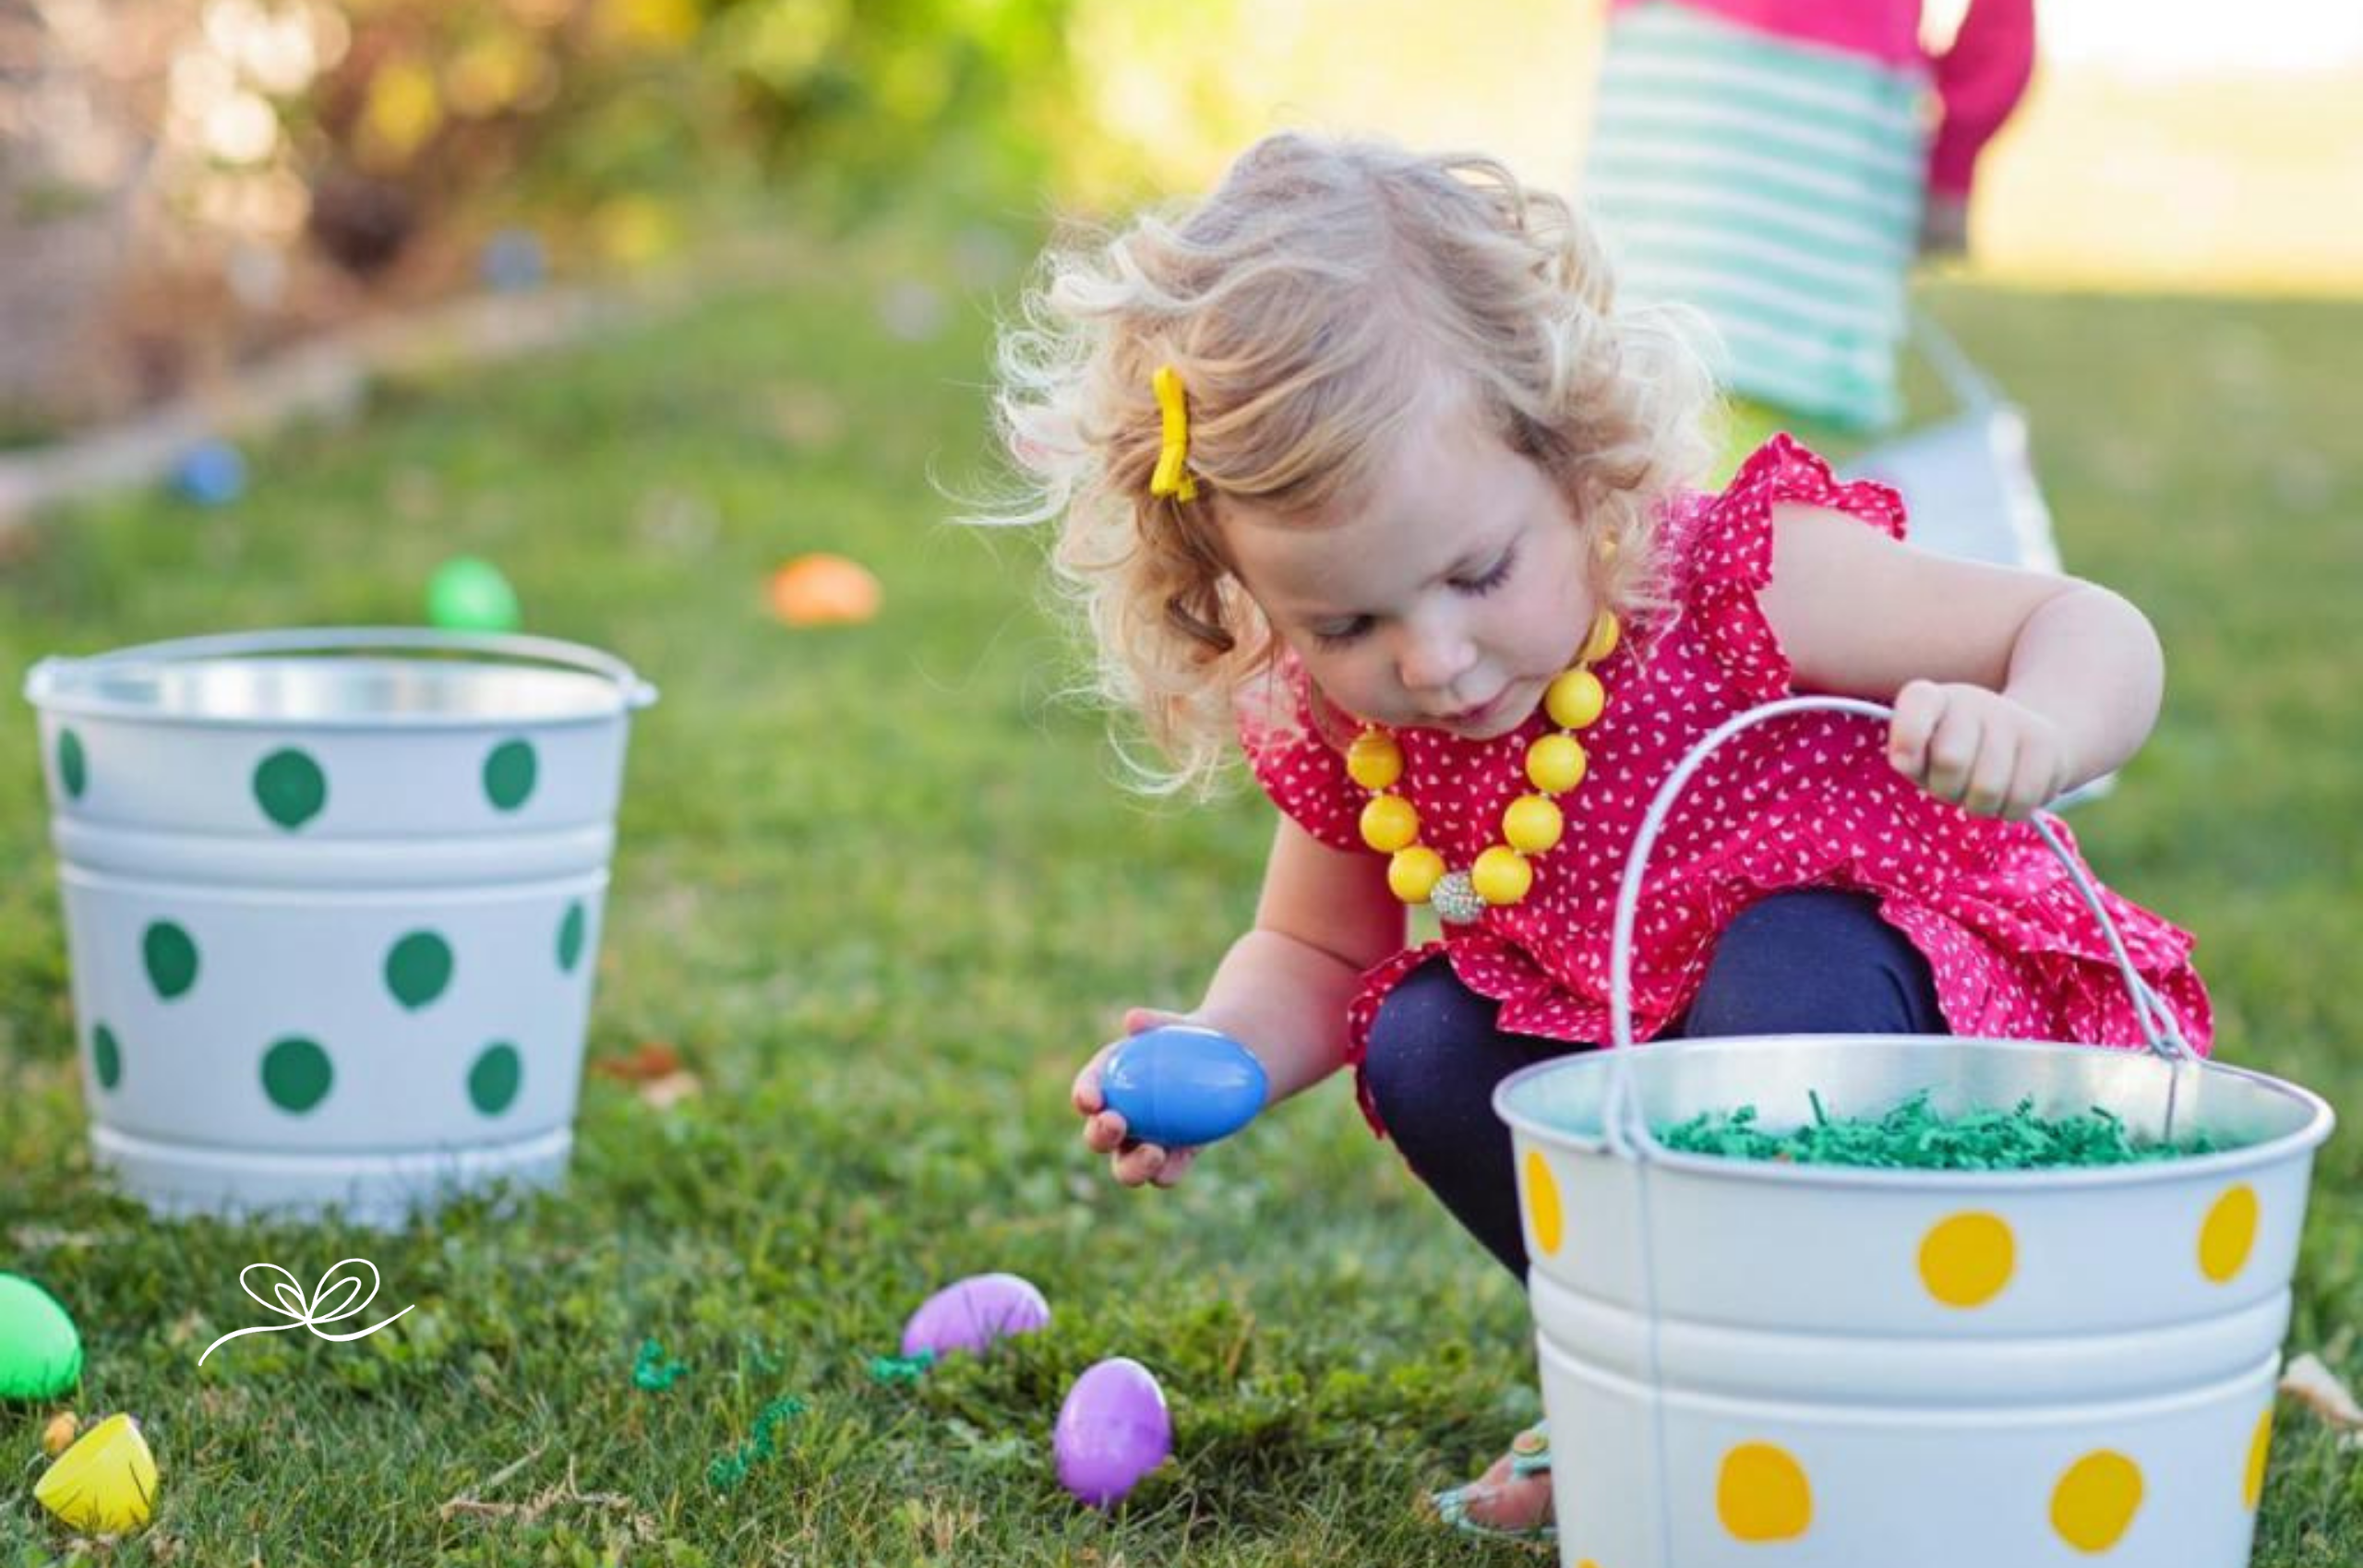 How to Make Your Easter Egg Hunt Inclusive - Specially Gifted